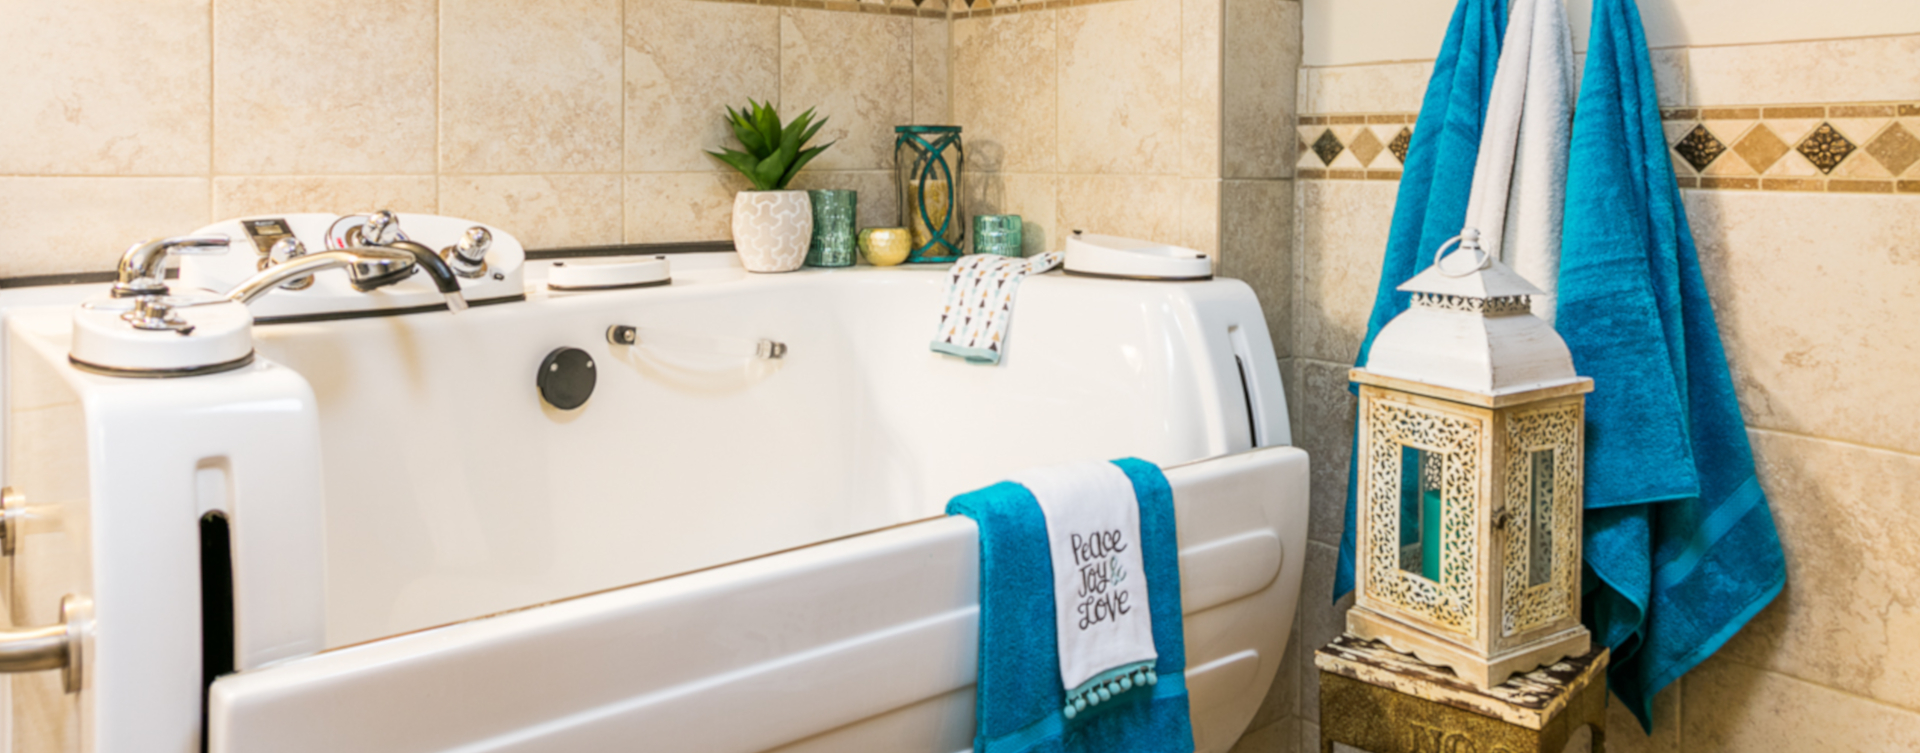 With an easy access design, our whirlpool allows you to enjoy a warm bath safely and comfortably at Bickford of West Des Moines